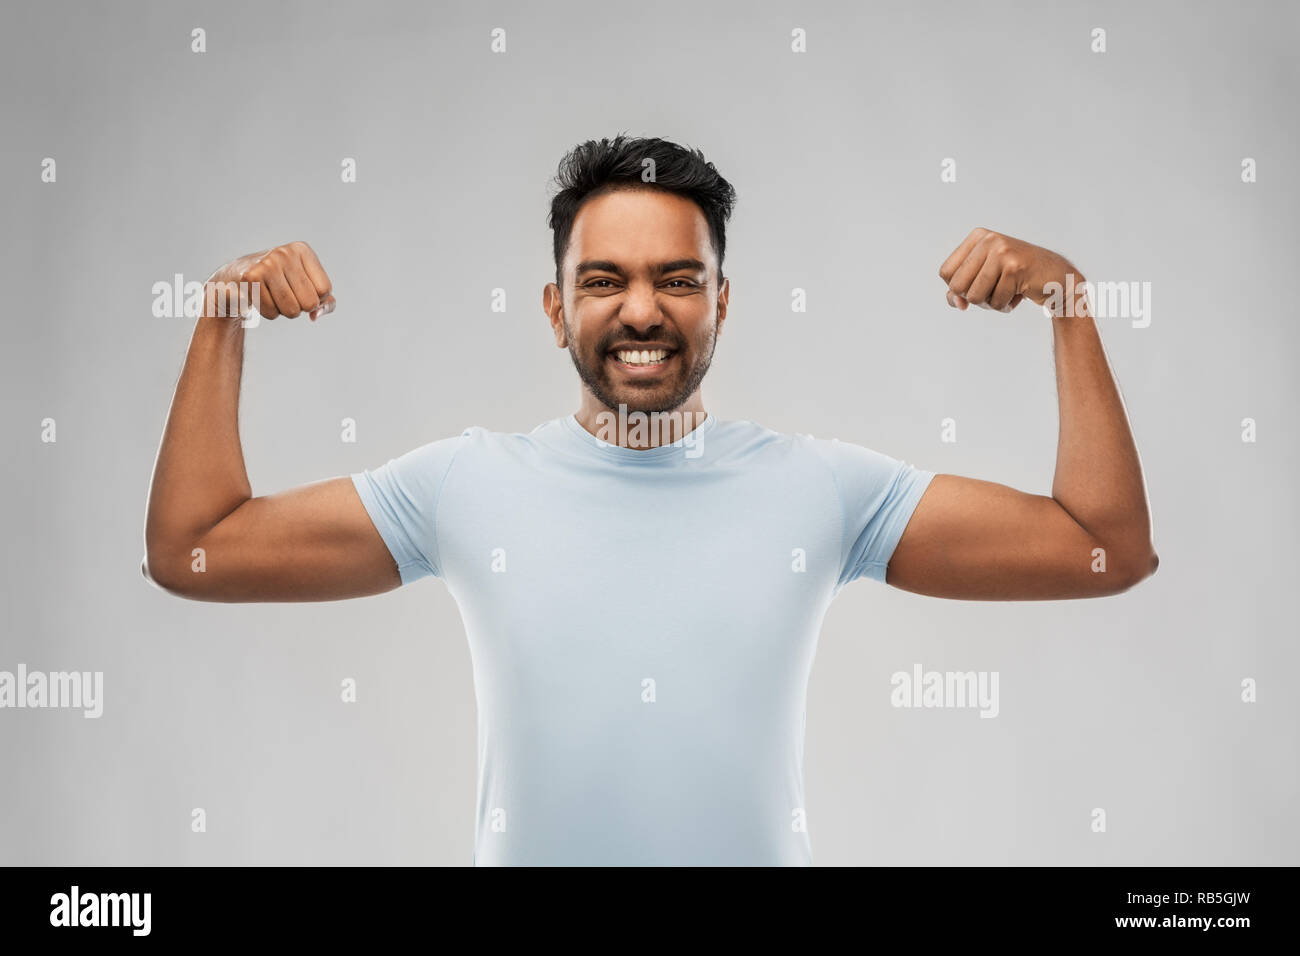 indian man showing biceps over grey background Stock Photo